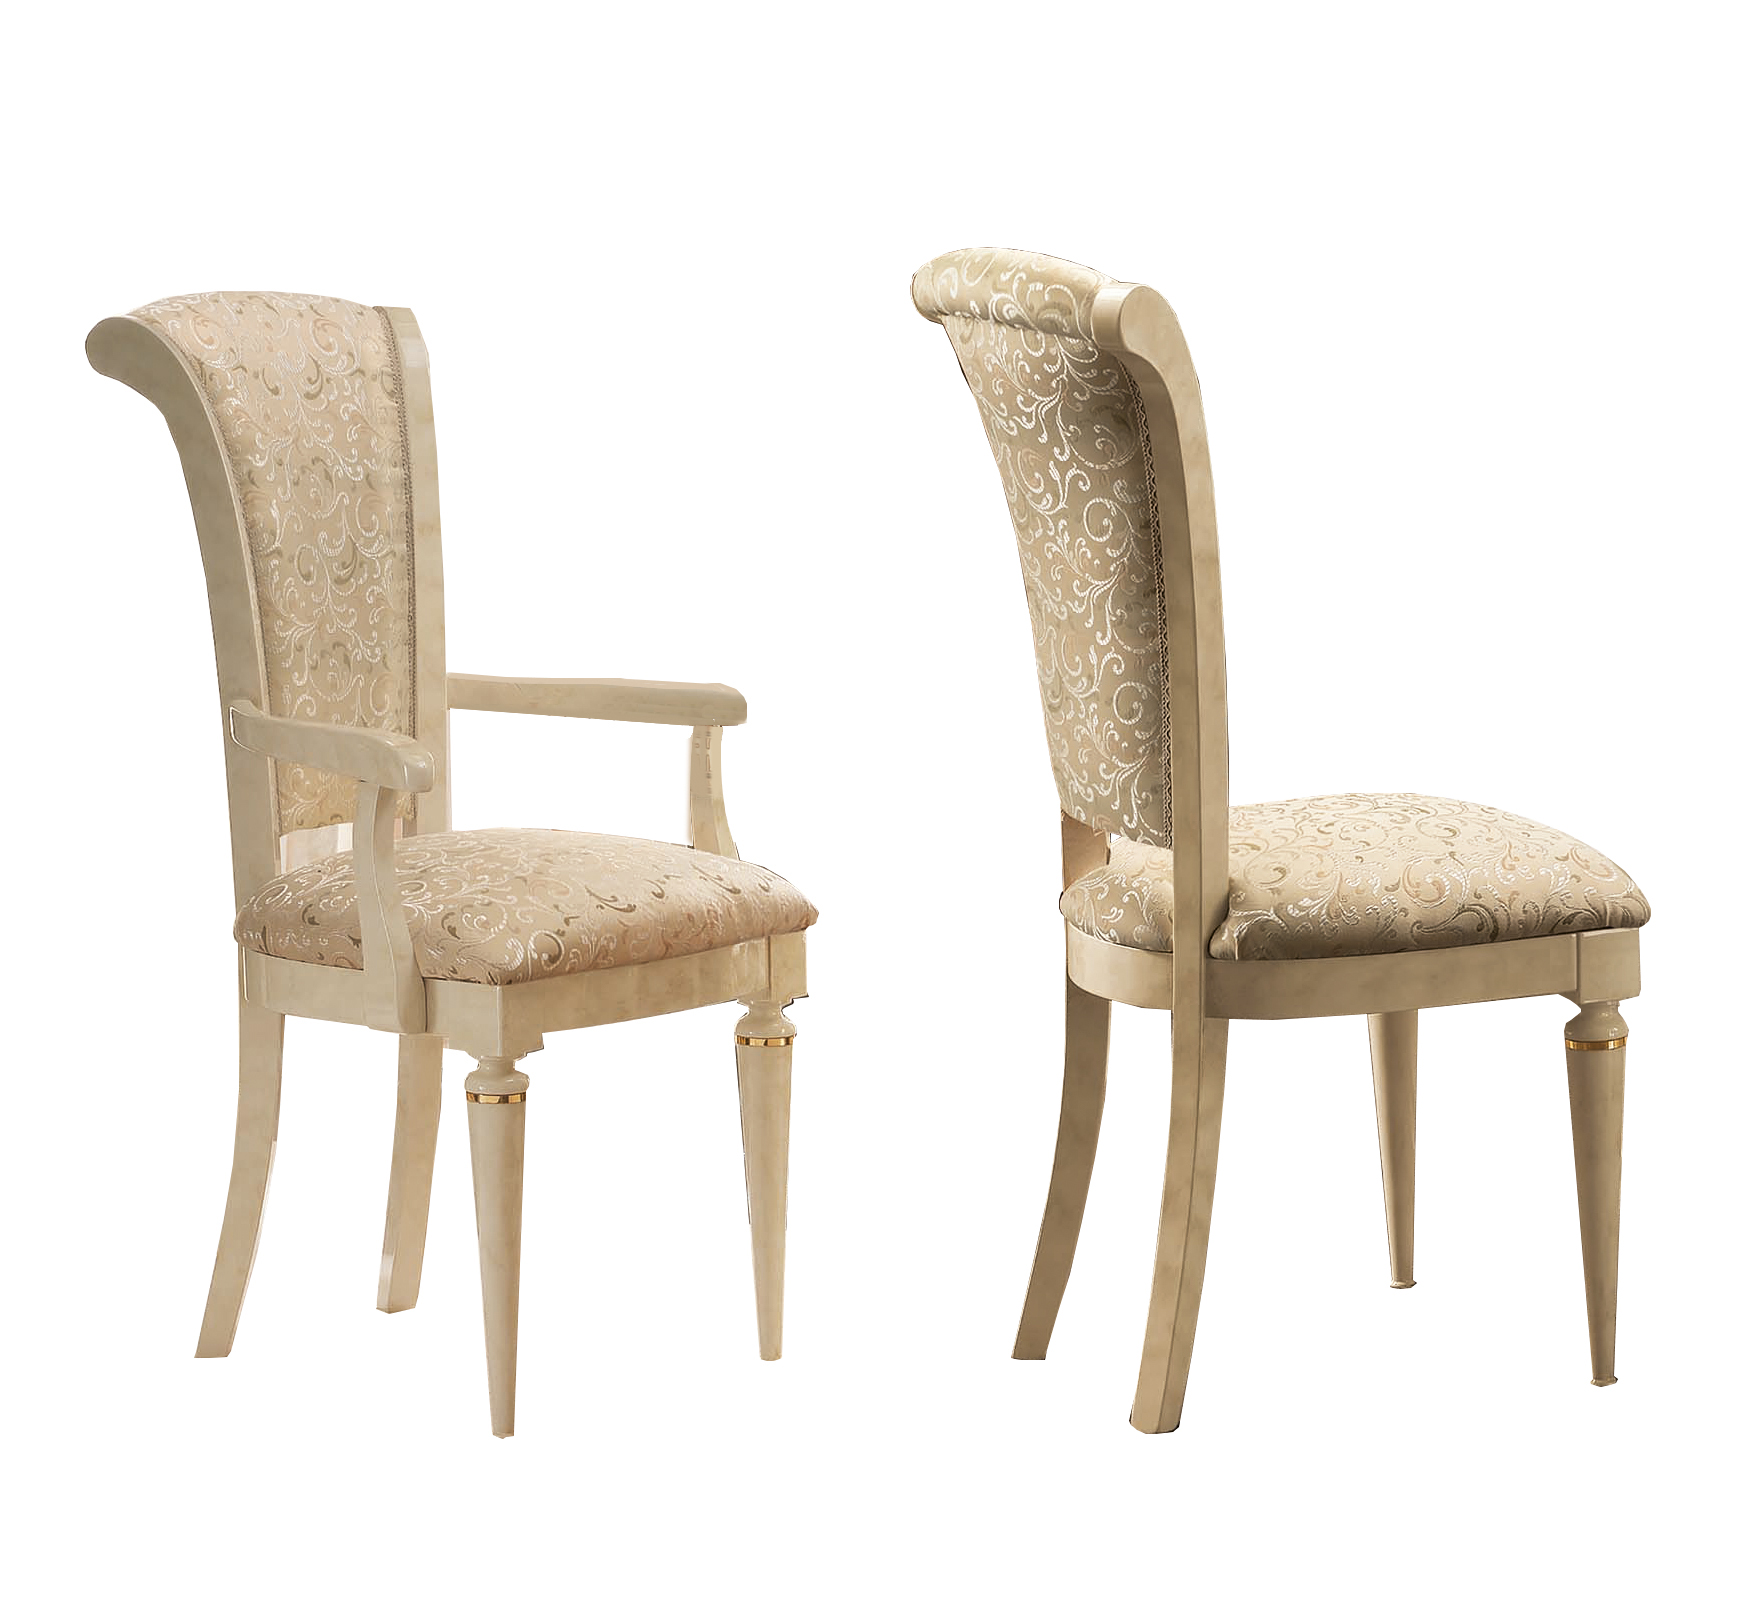 Brands Motif, Spain Fantasia Chair by Arredoclassic